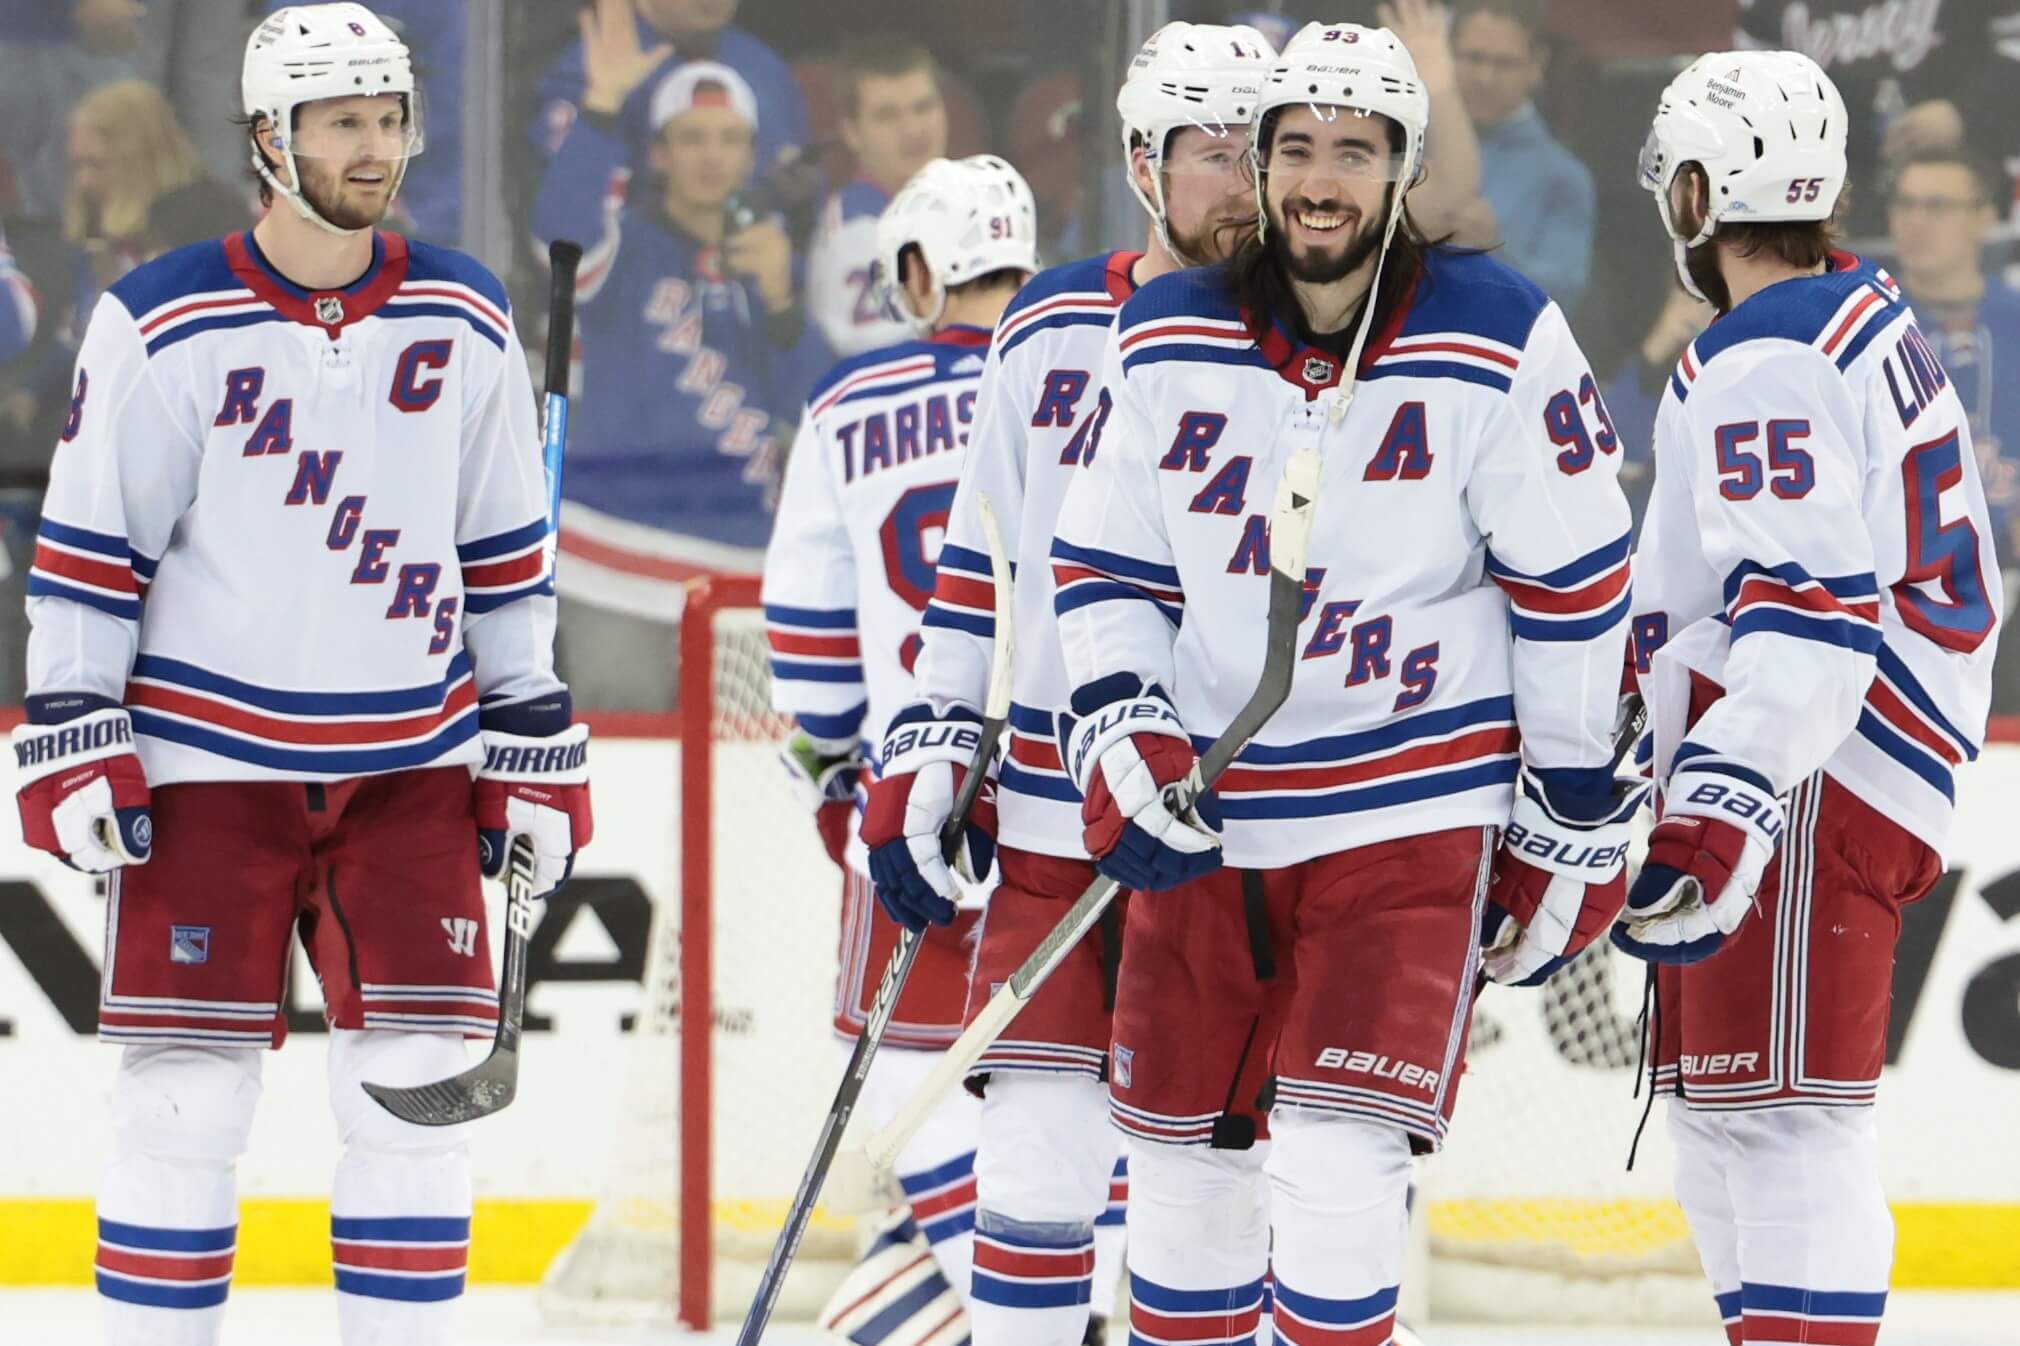 New Jersey Devils at New York Rangers odds, picks and prediction